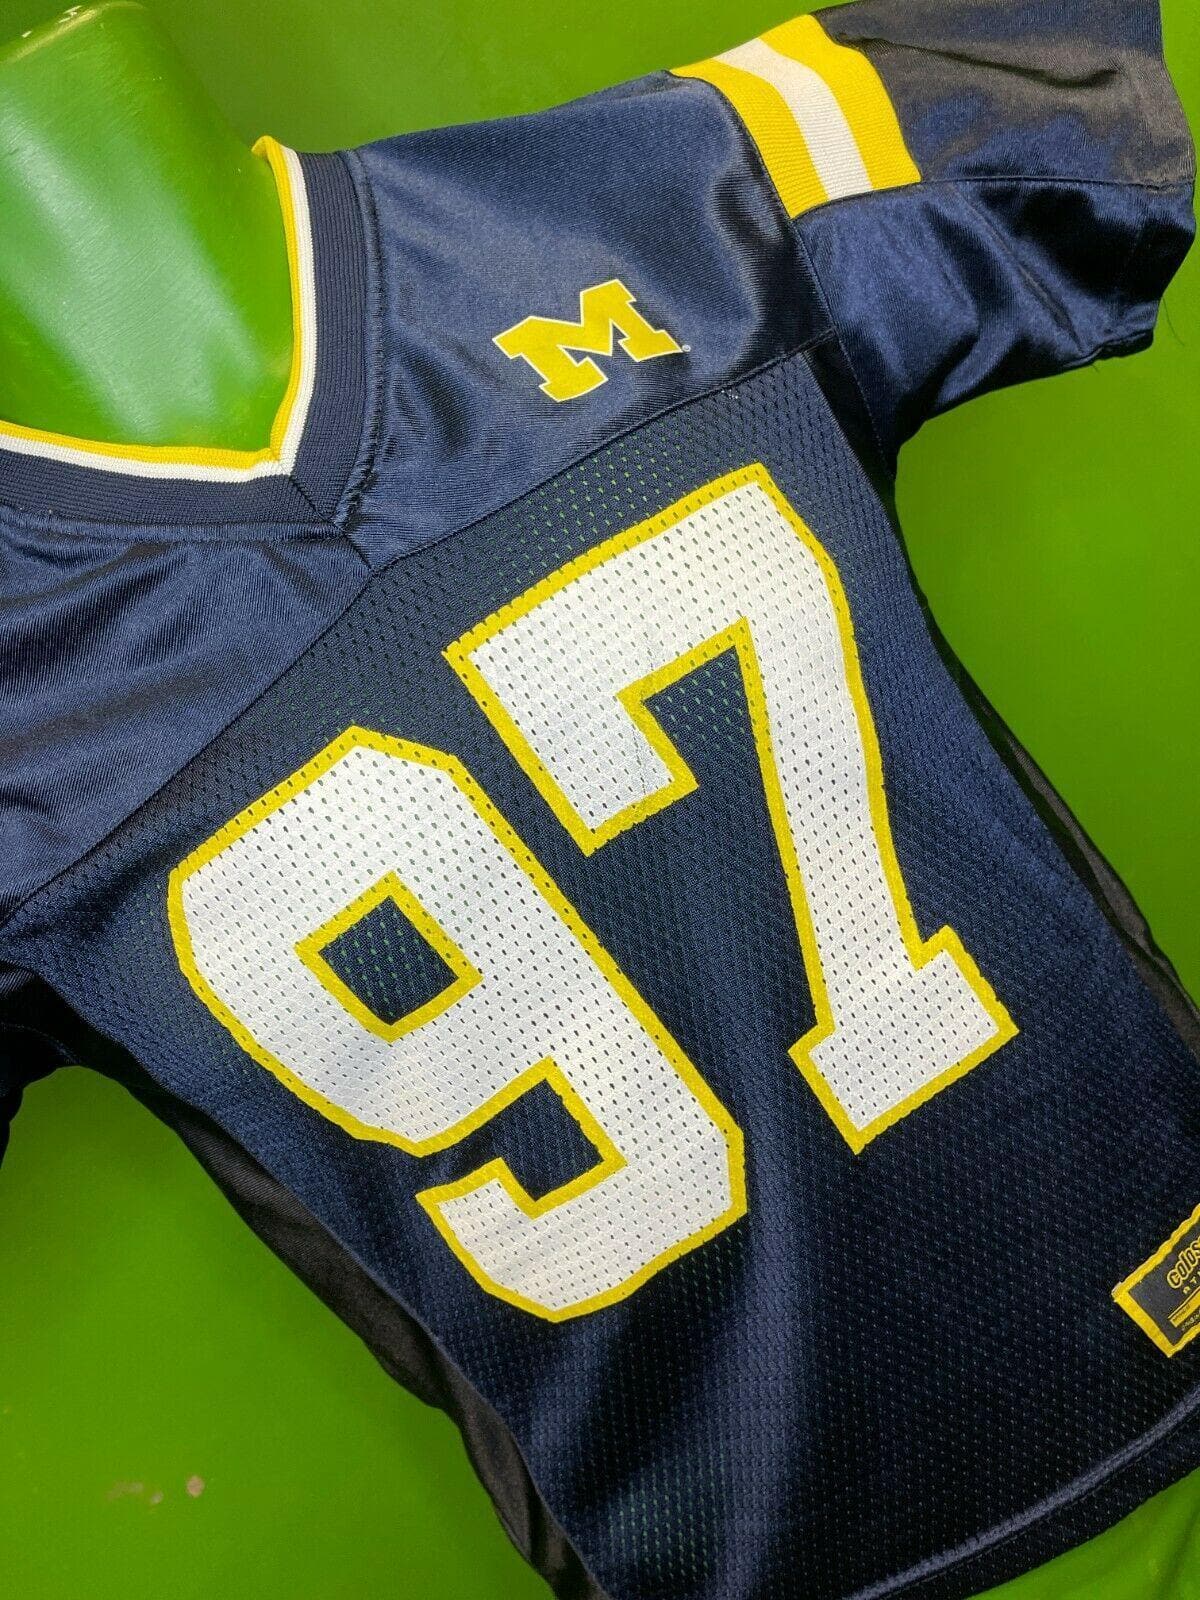 NCAA Michigan Wolverines Colosseum #97 Jersey Youth Small 6